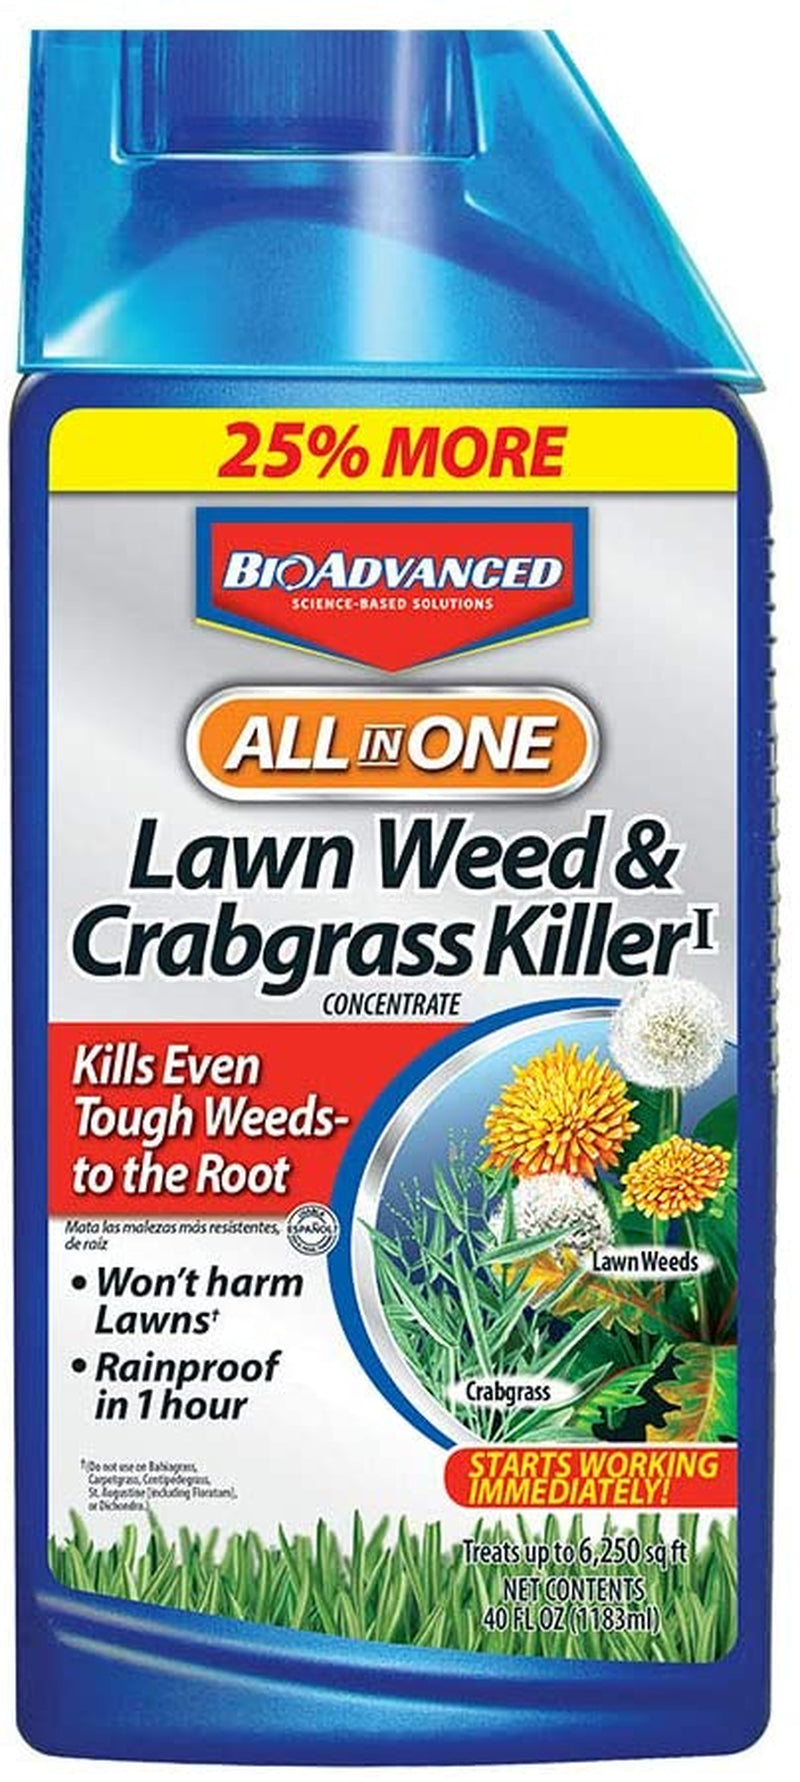 Bioadvanced All-In-One Lawn Weed and Crabgrass Killer I, Concentrate, 40 Oz